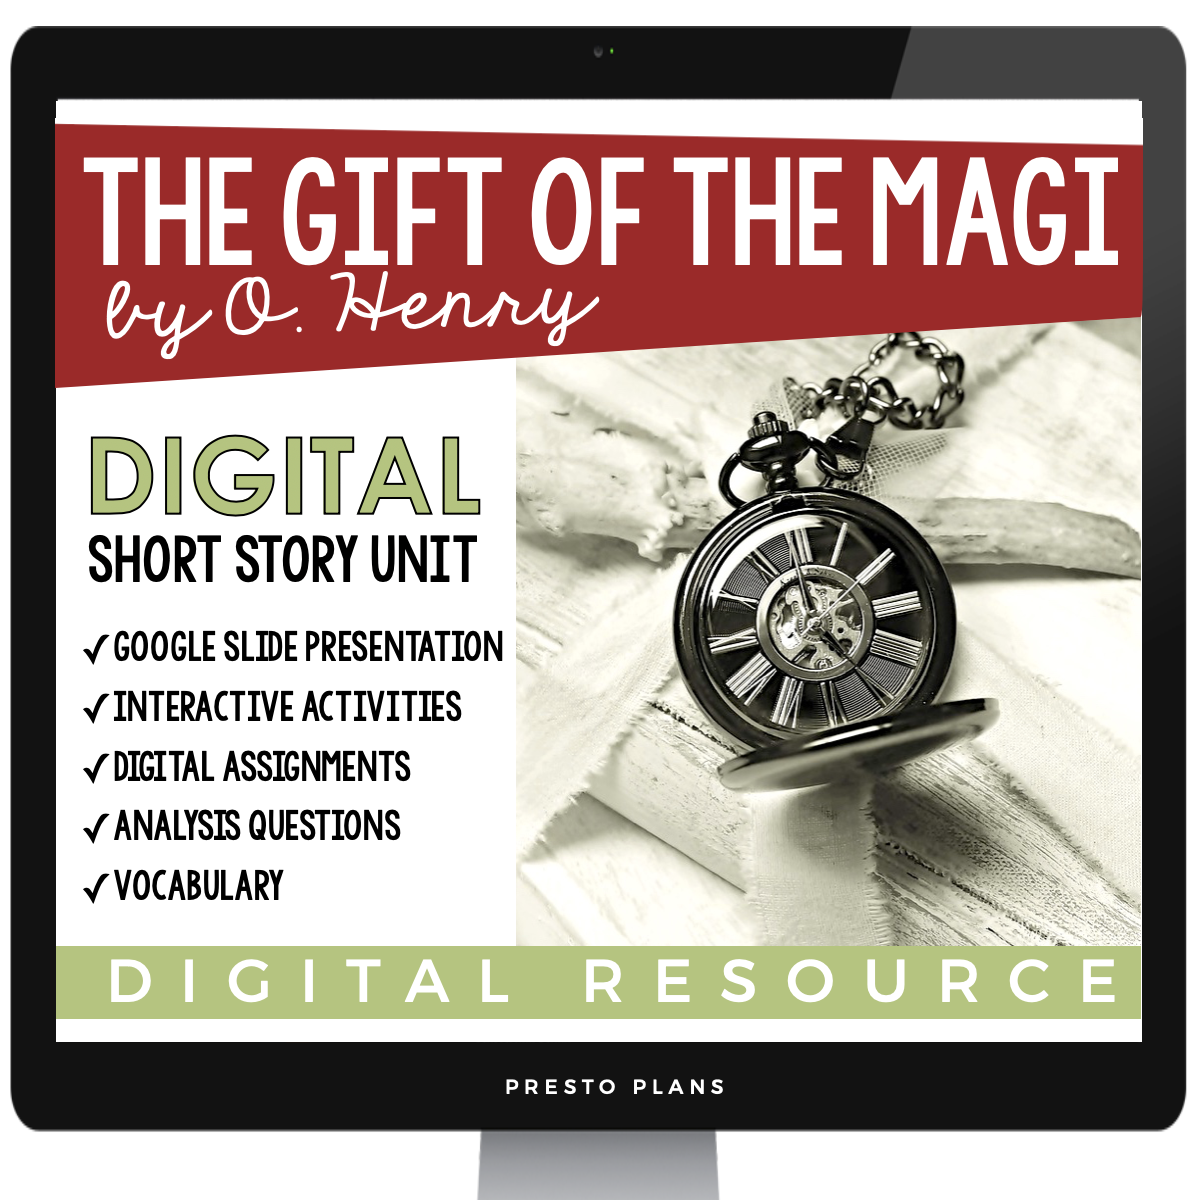 the-gift-of-the-magi-by-o-henry-short-story-digital-resources-prestoplanners